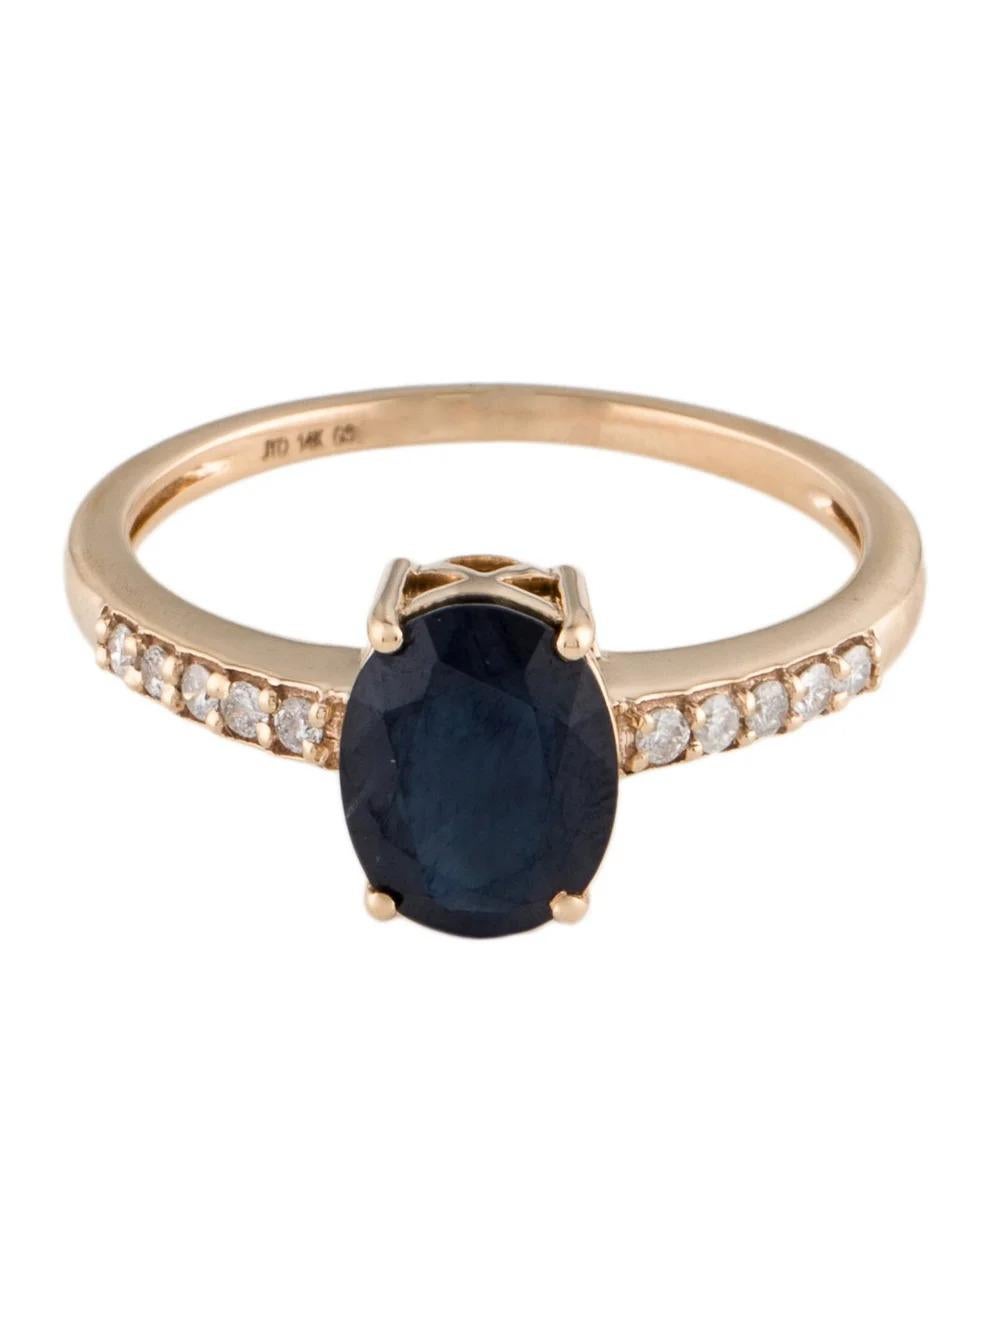 Oval Cut 14K Sapphire Diamond Cocktail Ring 1.78ct Size 8.75 - Vintage, Statement Jewelry For Sale